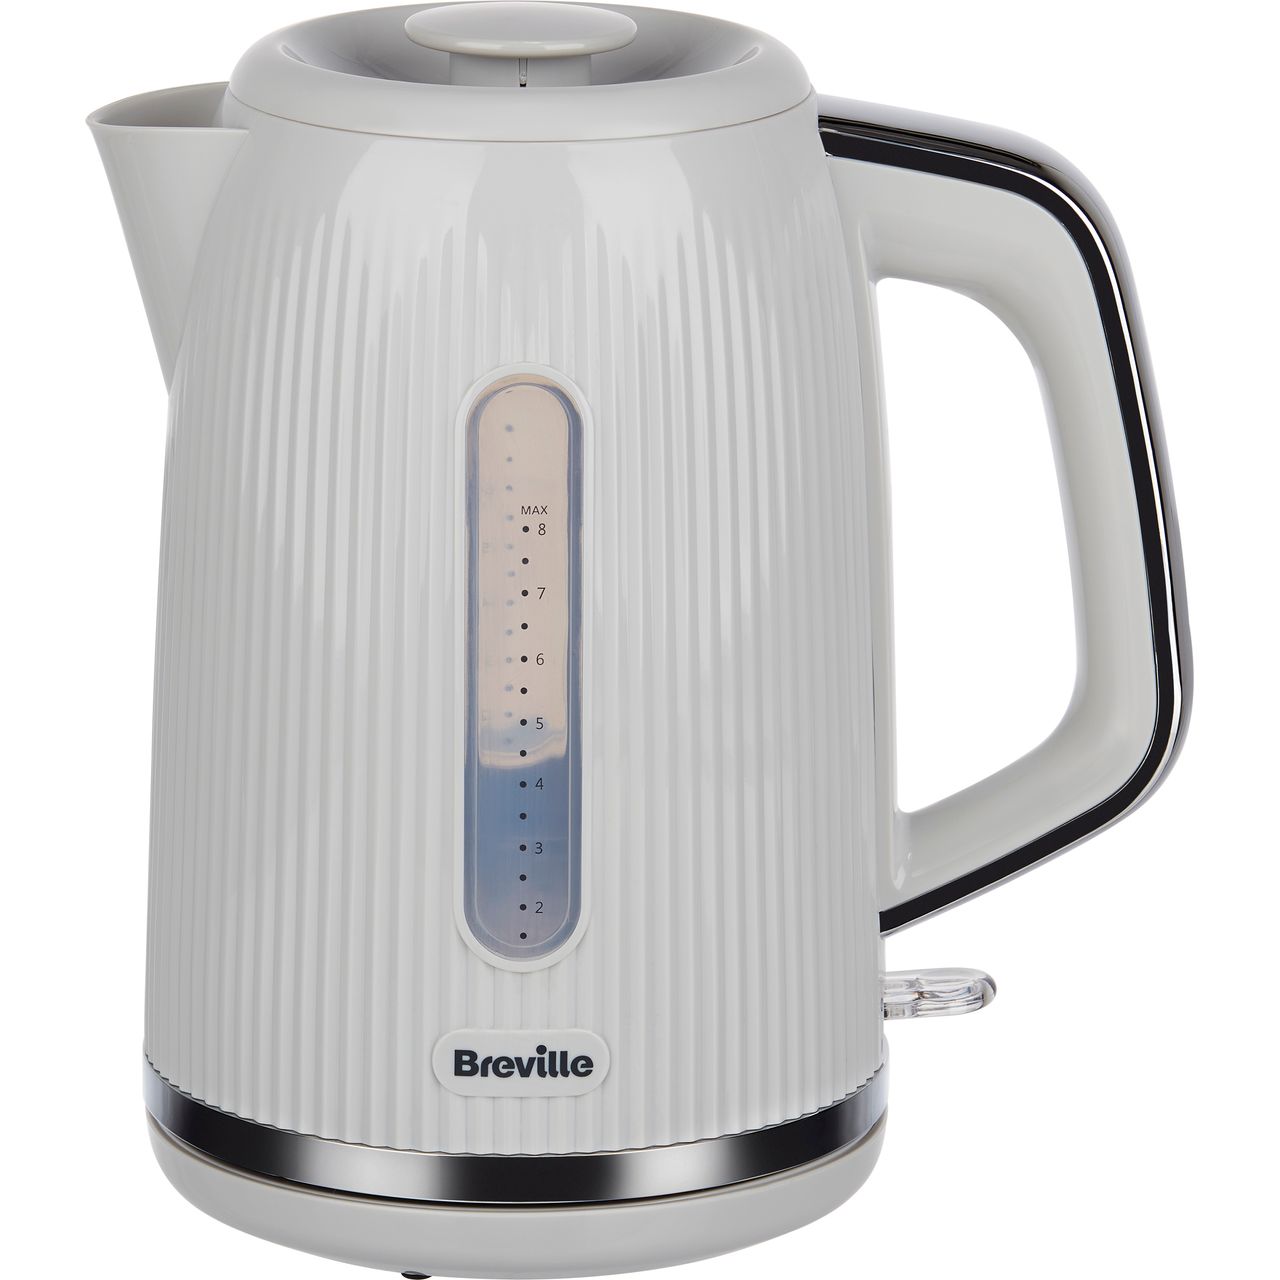 Breville Breville Bold Ice Grey Electric Kettle1.7L3kW Fast BoilGrey & Silver Ch 